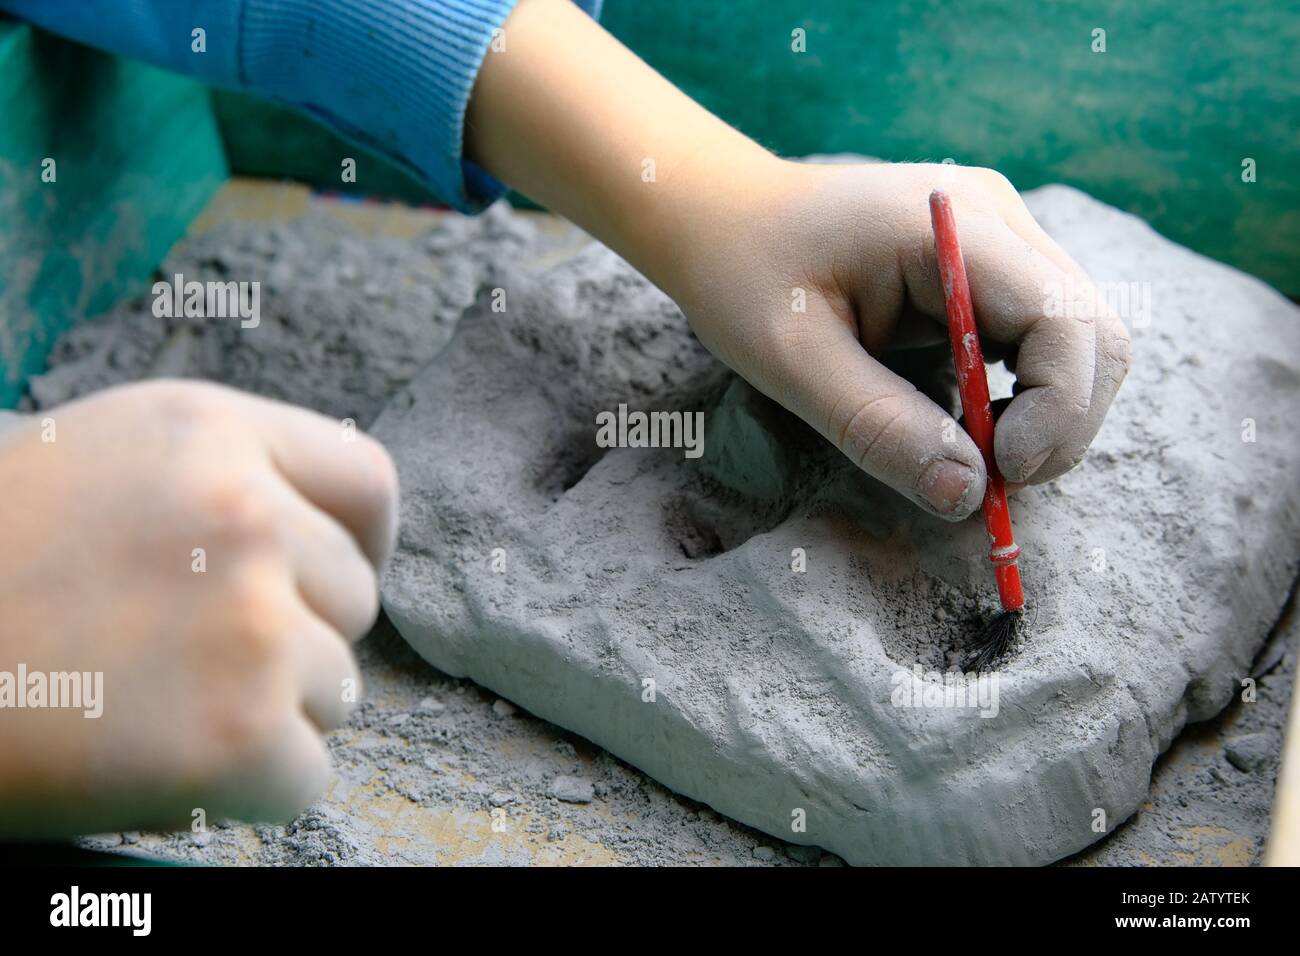 Child playing fossil, mineral and treasure excavation game. Child is using tools, such as a brush. Stock Photo